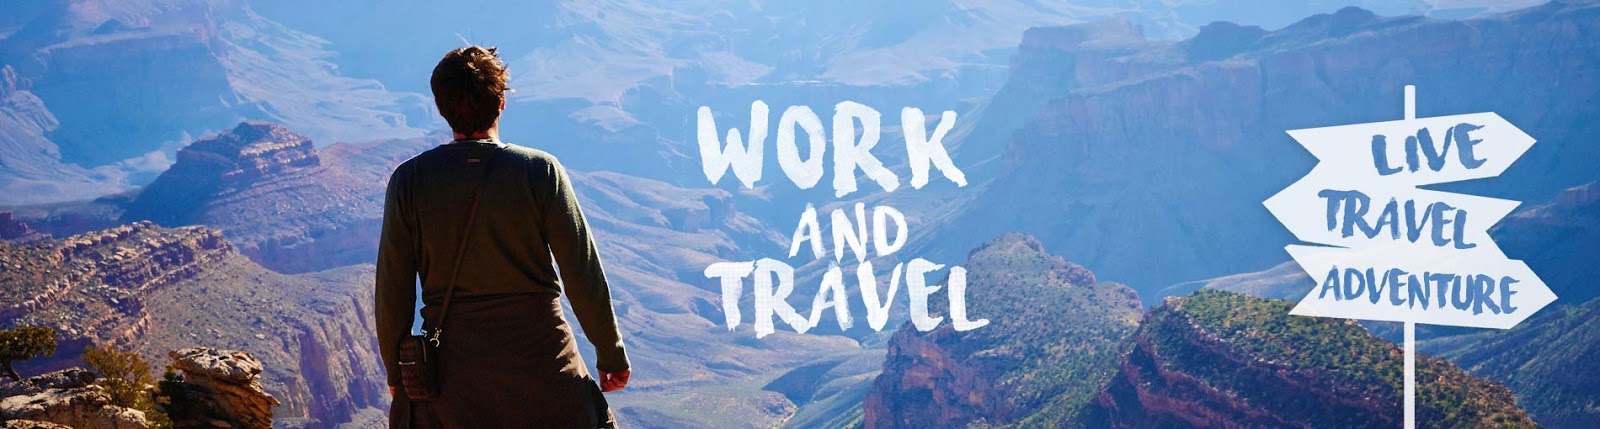 work and travel online